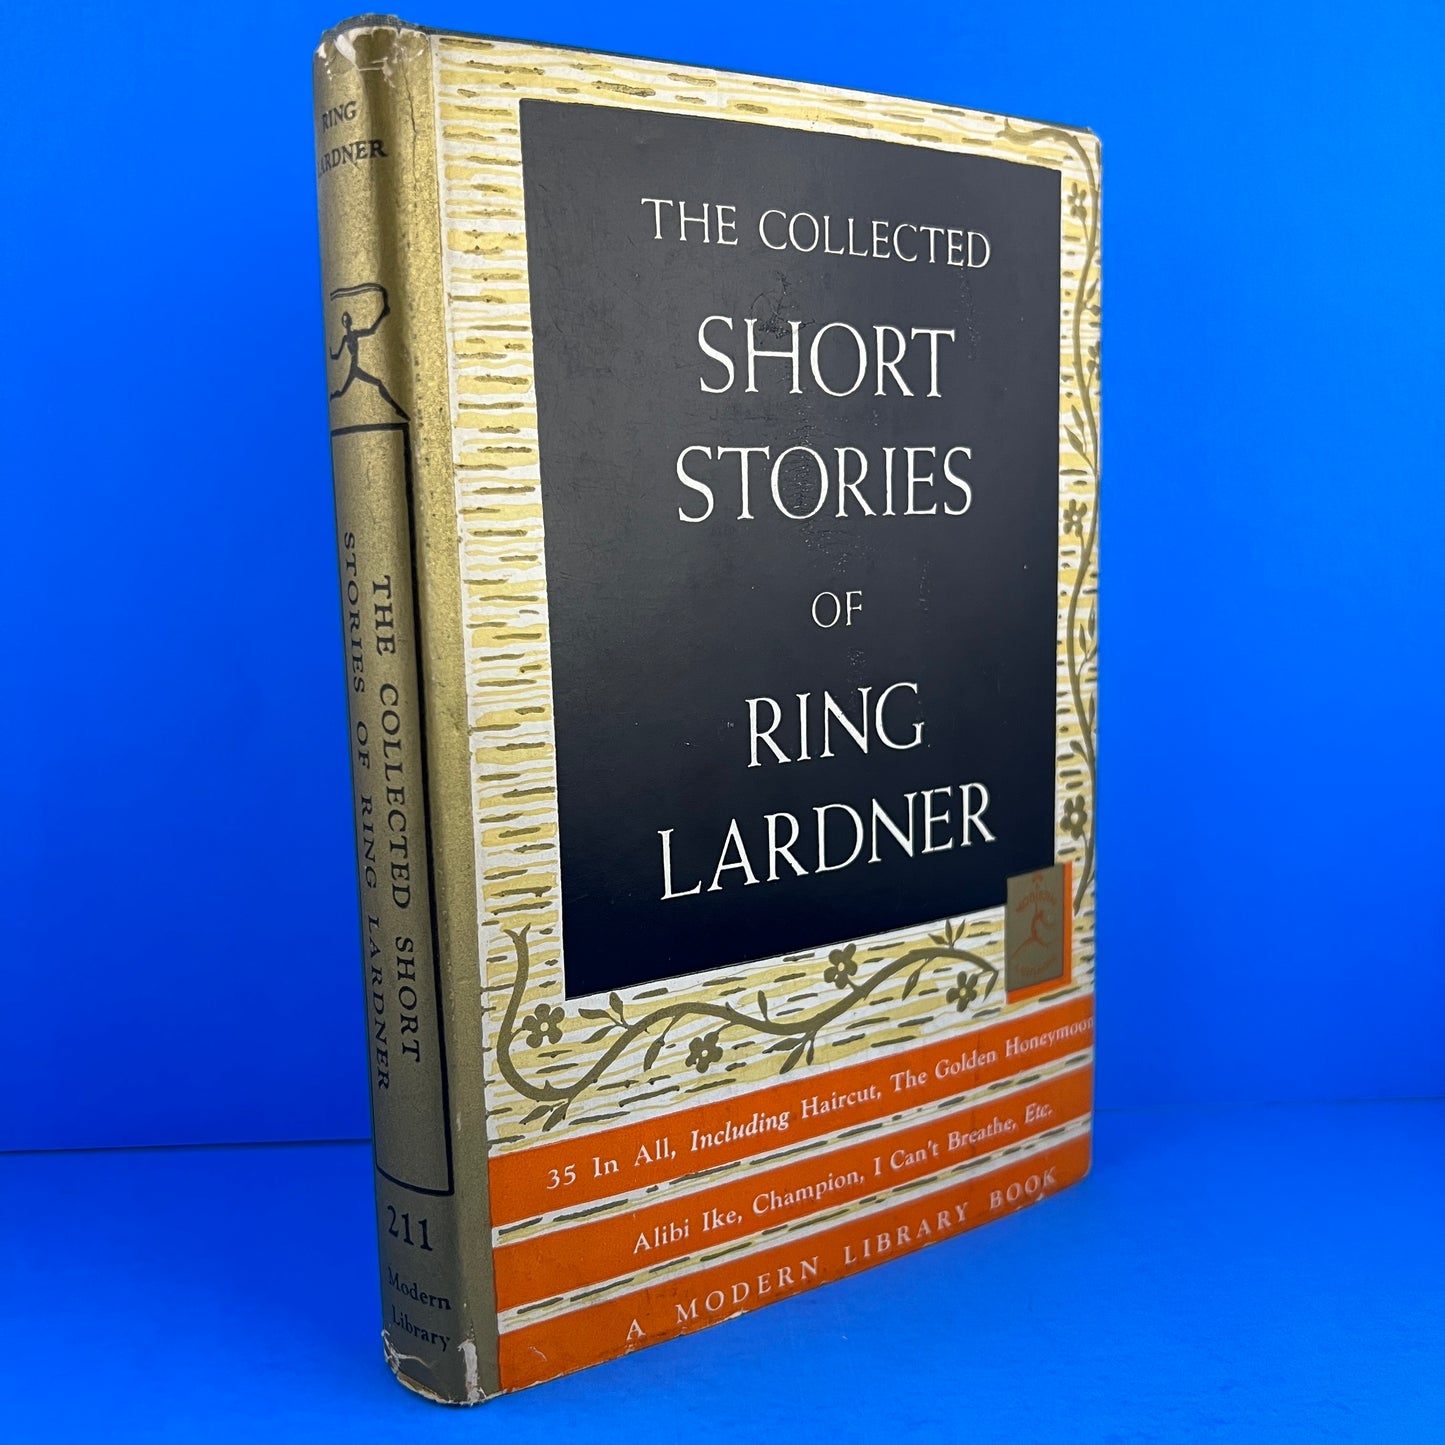 The Collected Short Stories of Ring Lardner